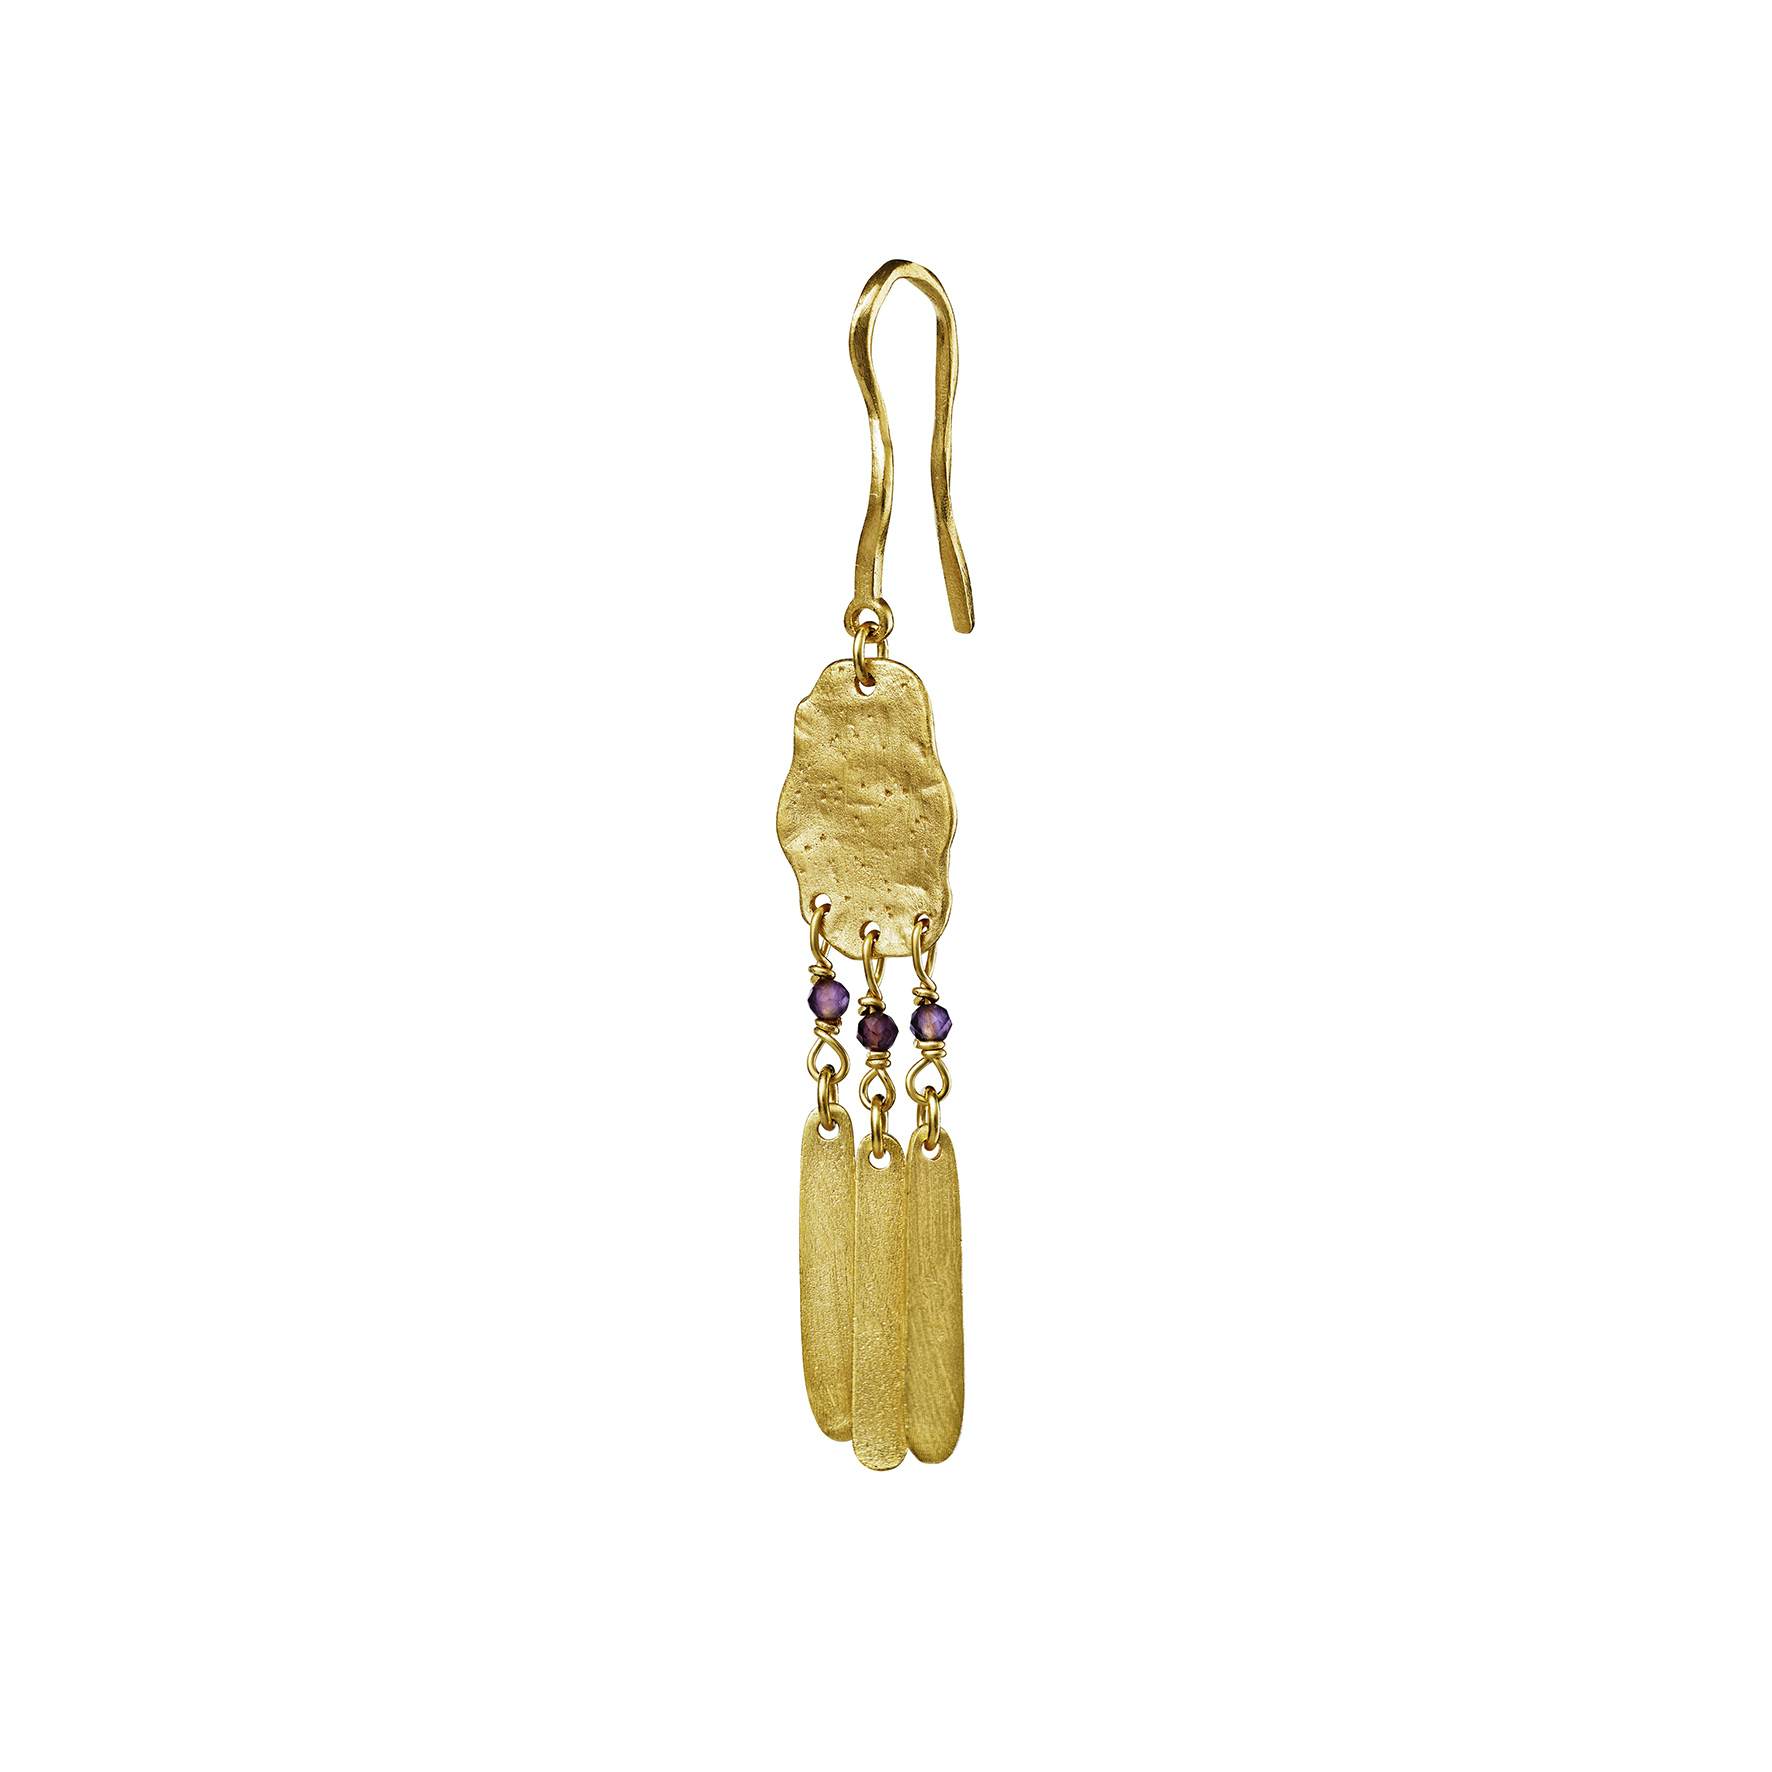 Evalina Earring from Maanesten in Goldplated-Silver Sterling 925